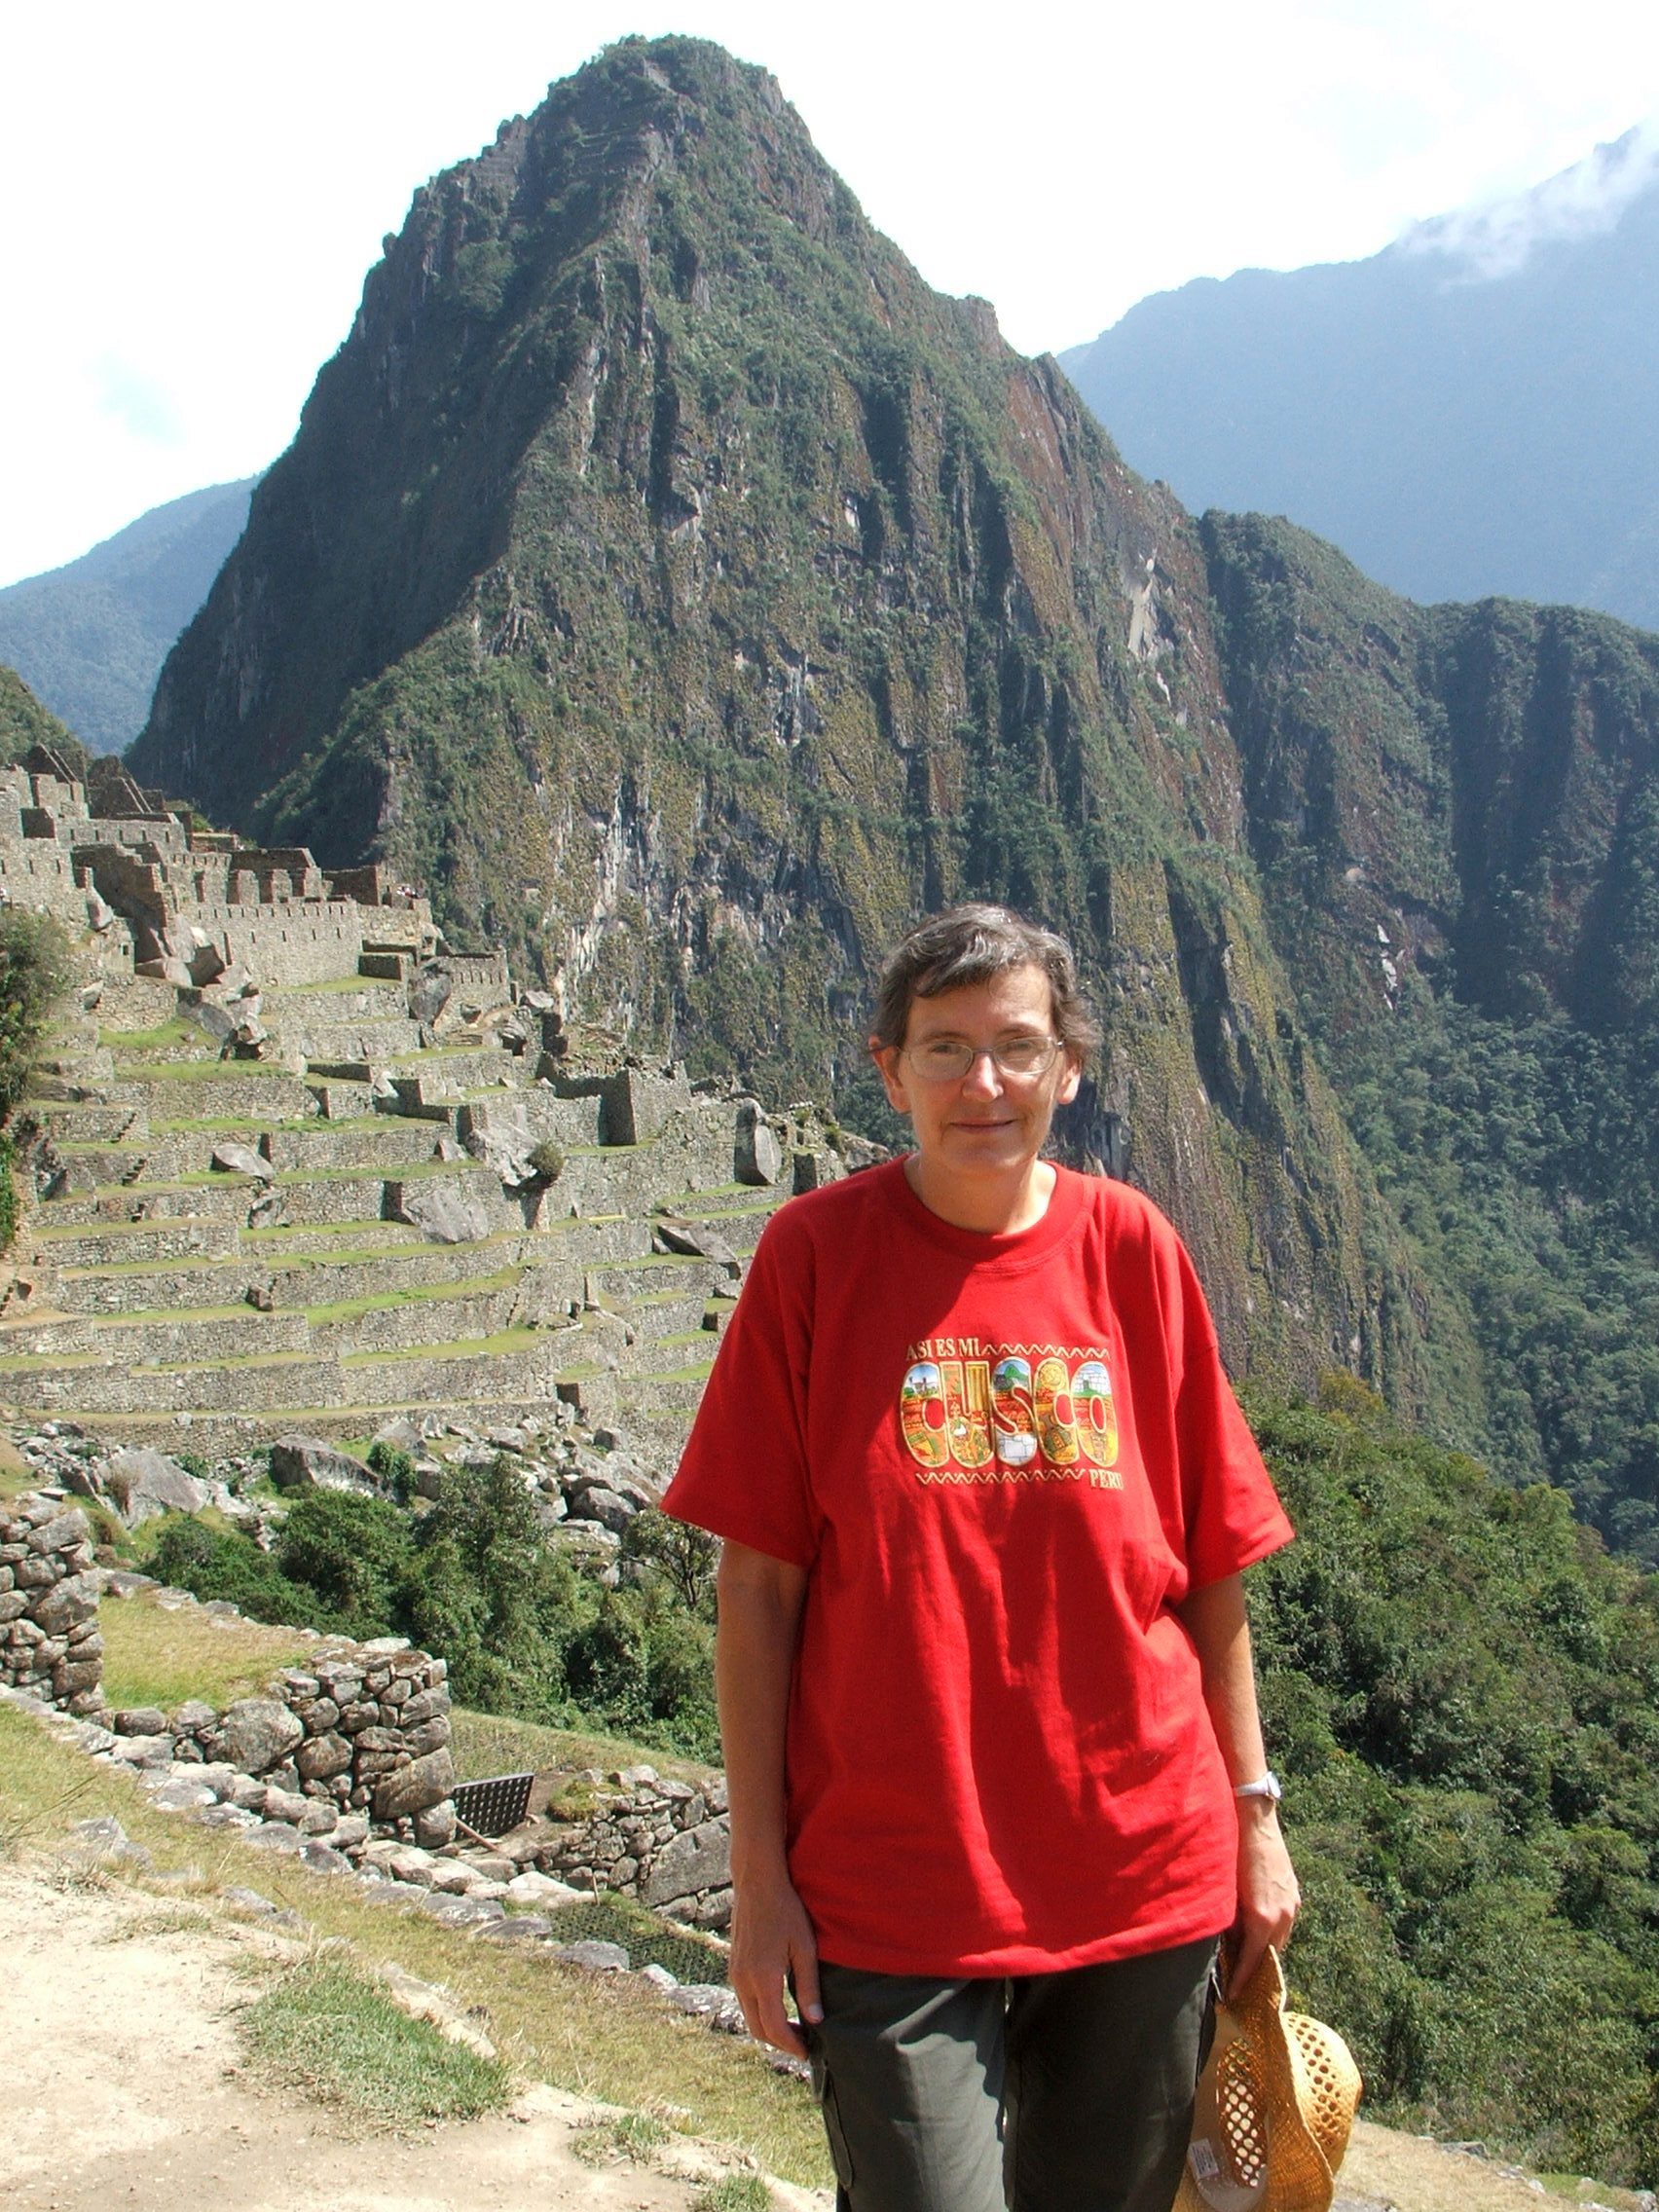 Karen Watson standing in front of a larger mountain and ancient village.